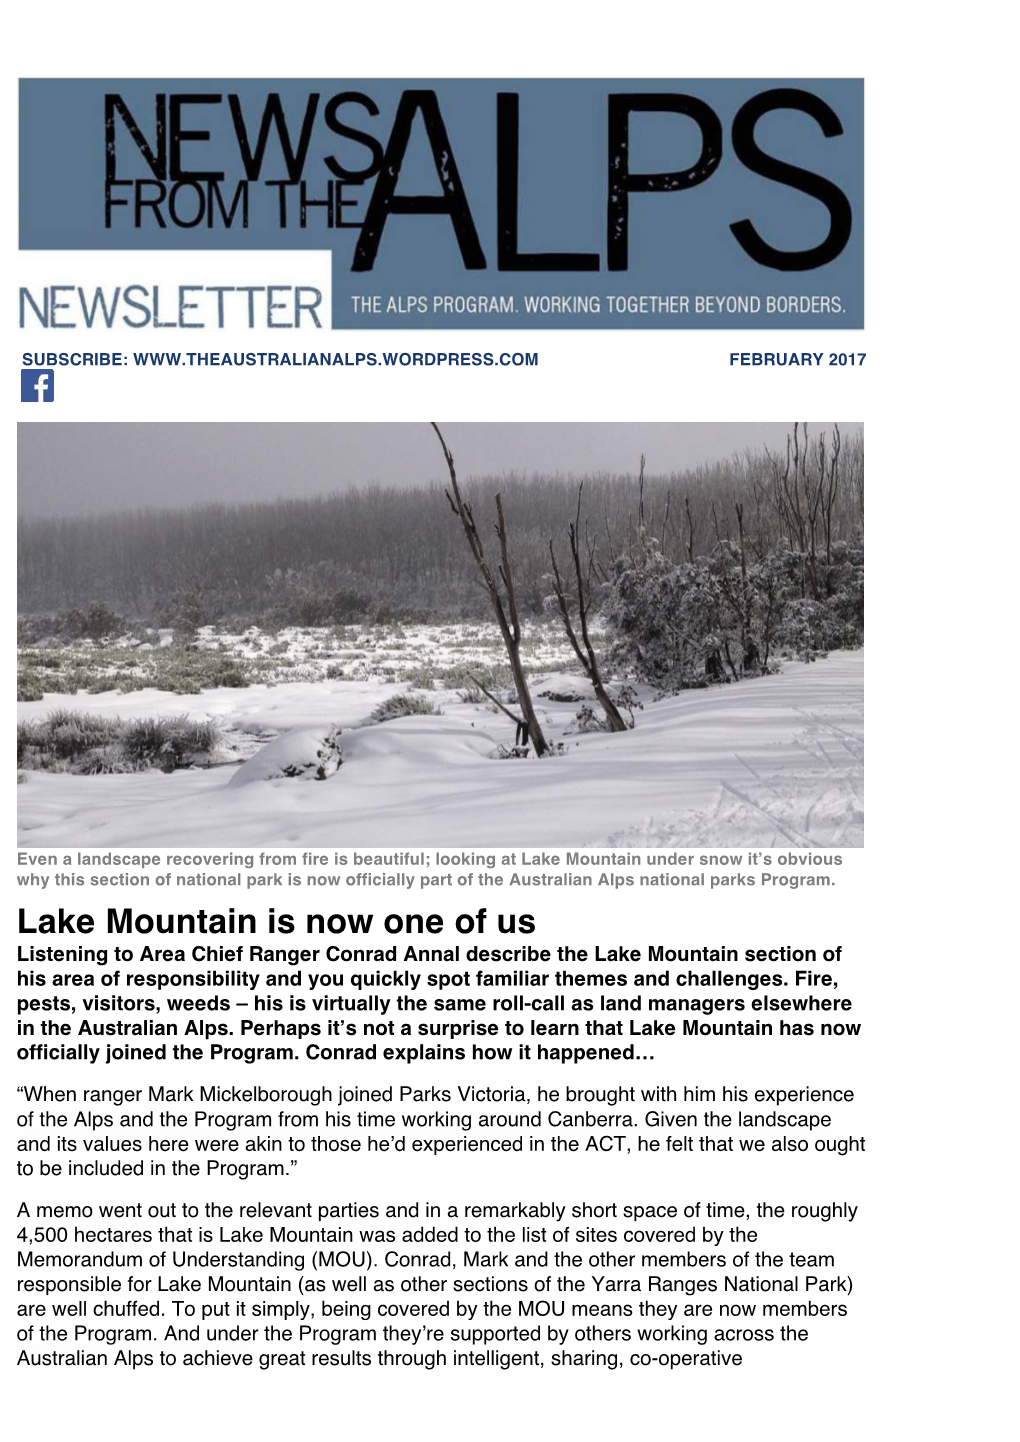 Lake Mountain Is Now One of Us